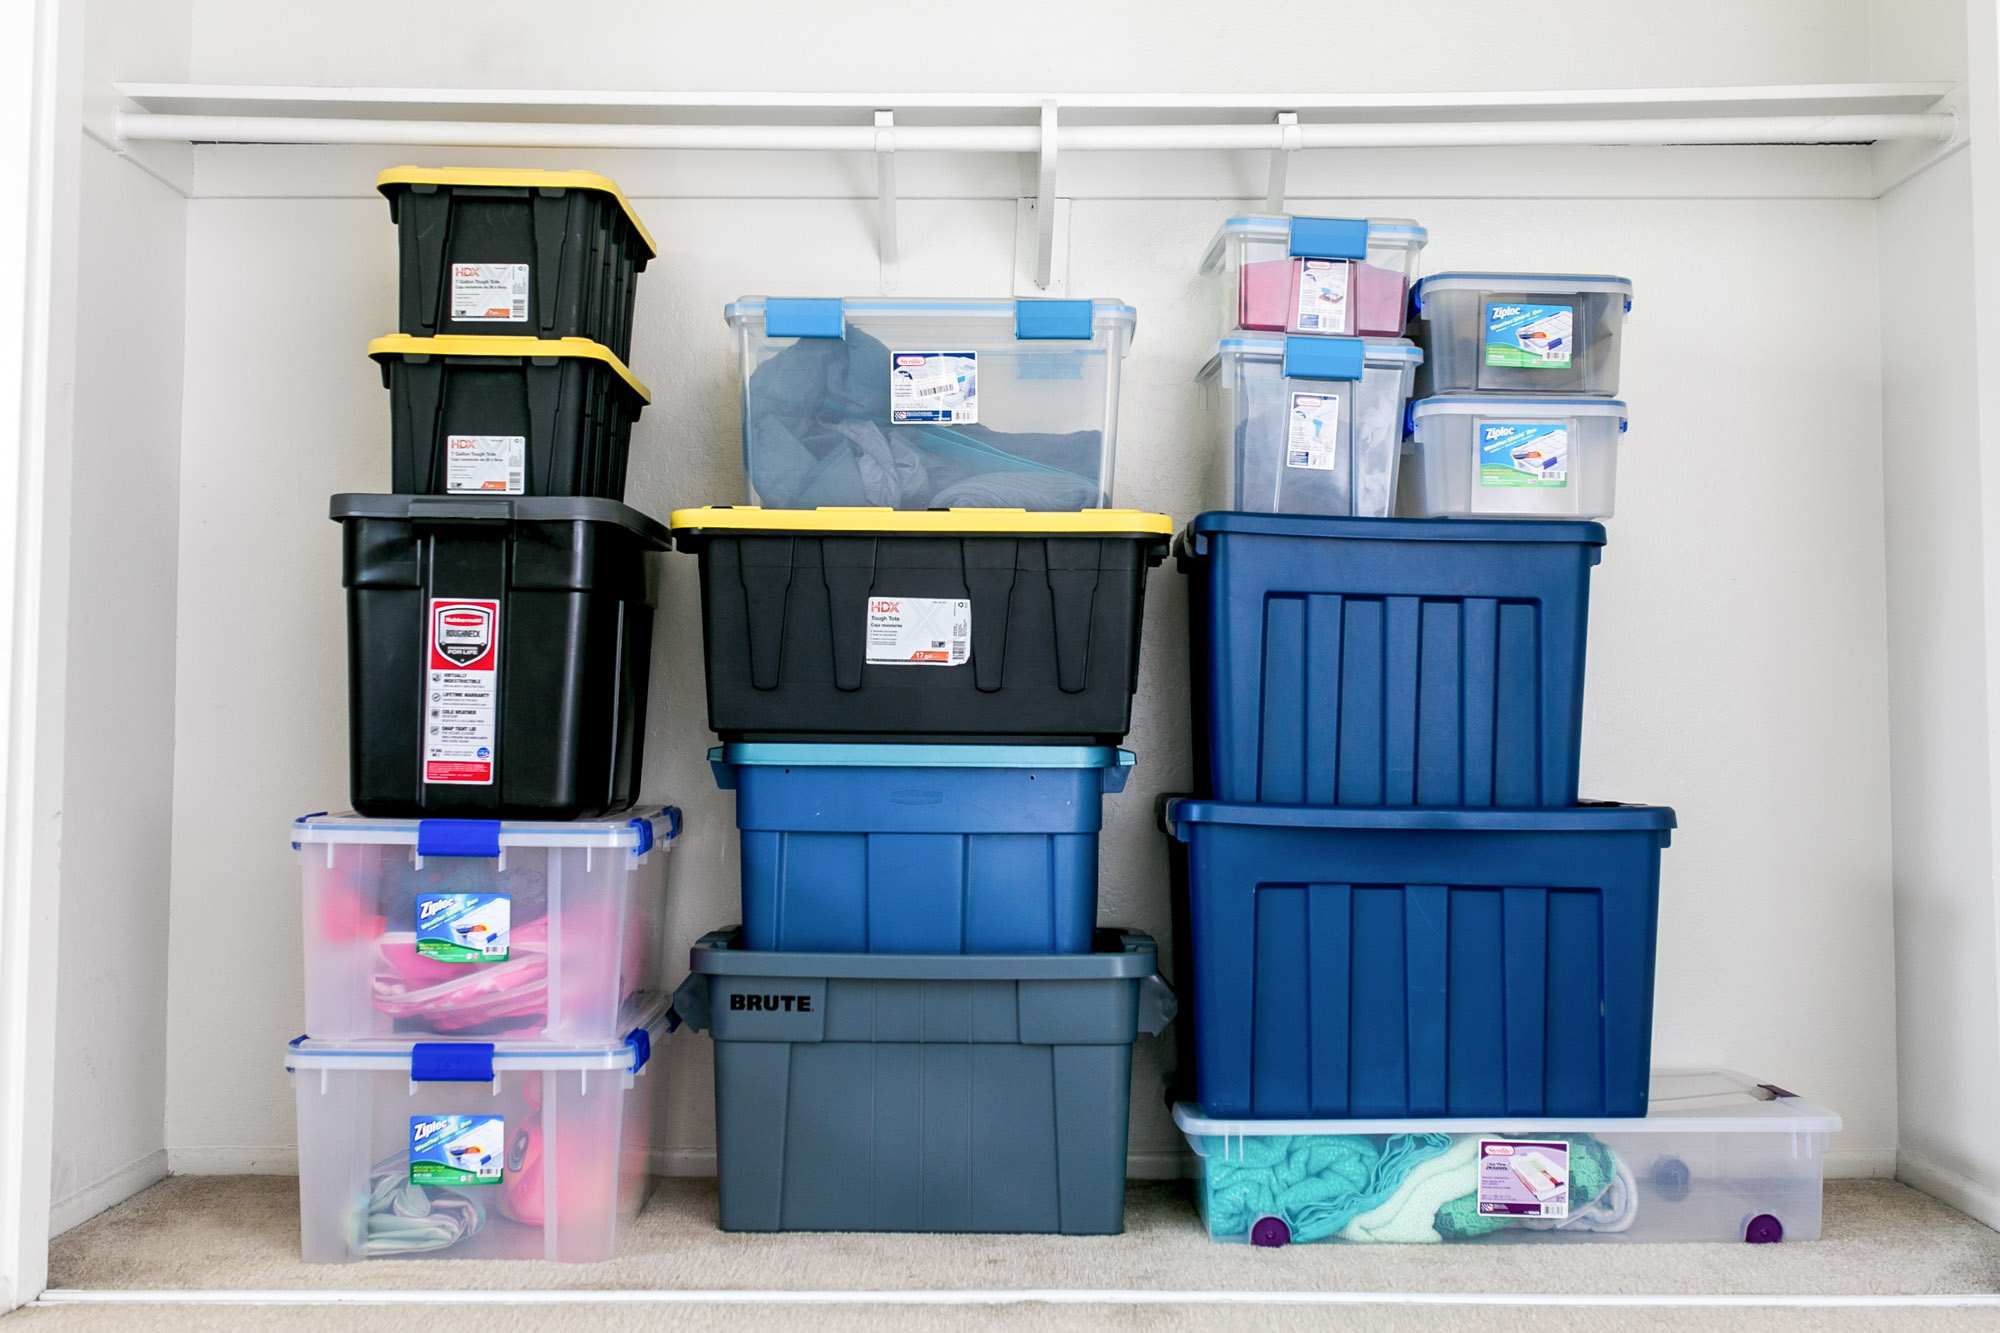 The Best Storage Container Of 2021, Shelves To Hold Storage Bins